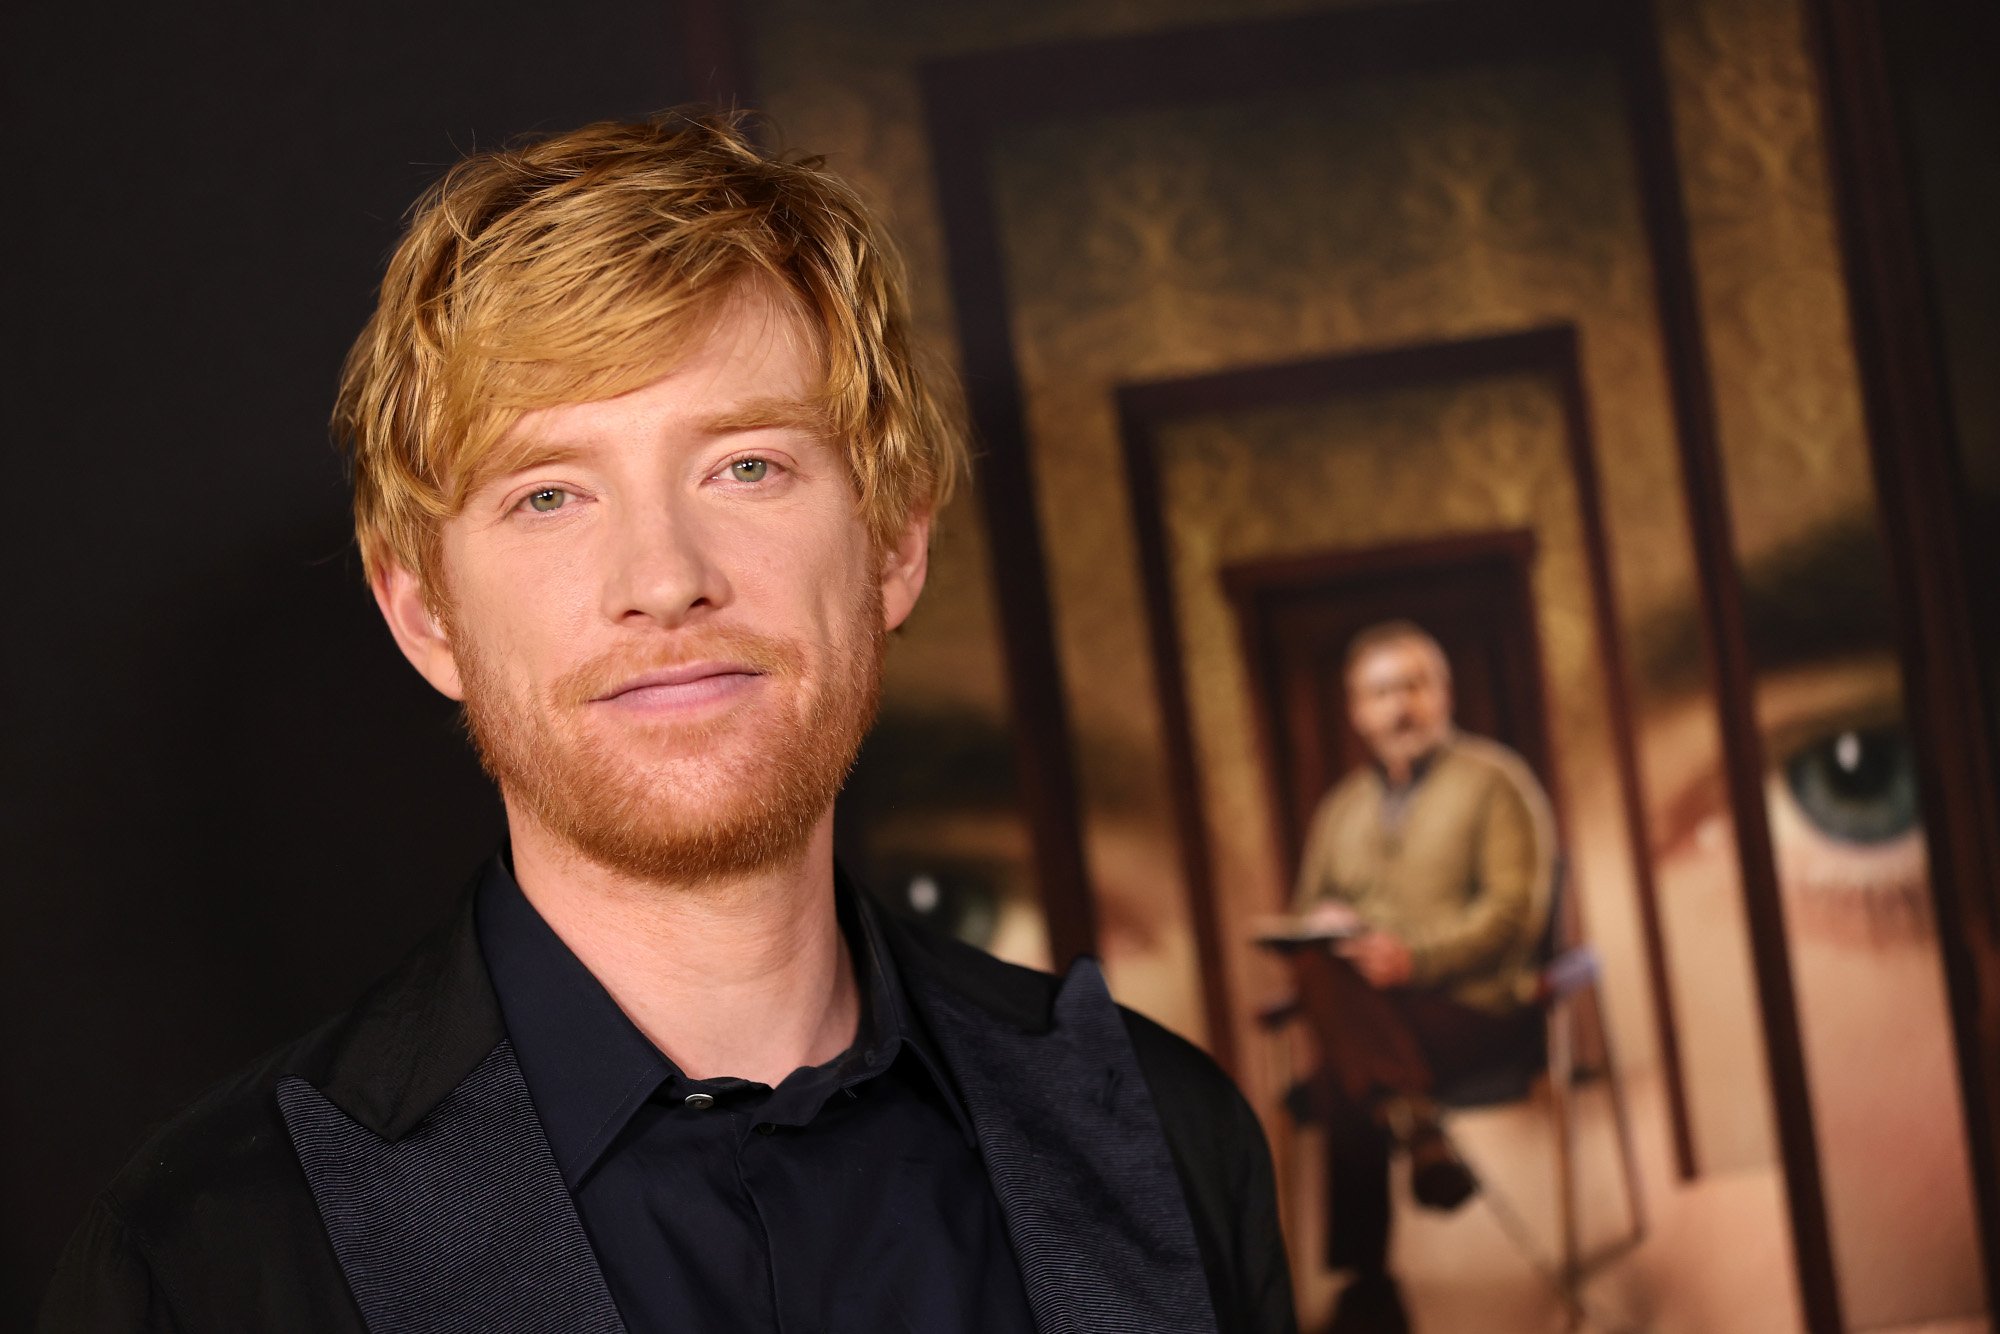 'The Patient' star Domhnall Gleeson. He's wearing a black shirt, black jacket, and standing in front of a poster for the Hulu series.